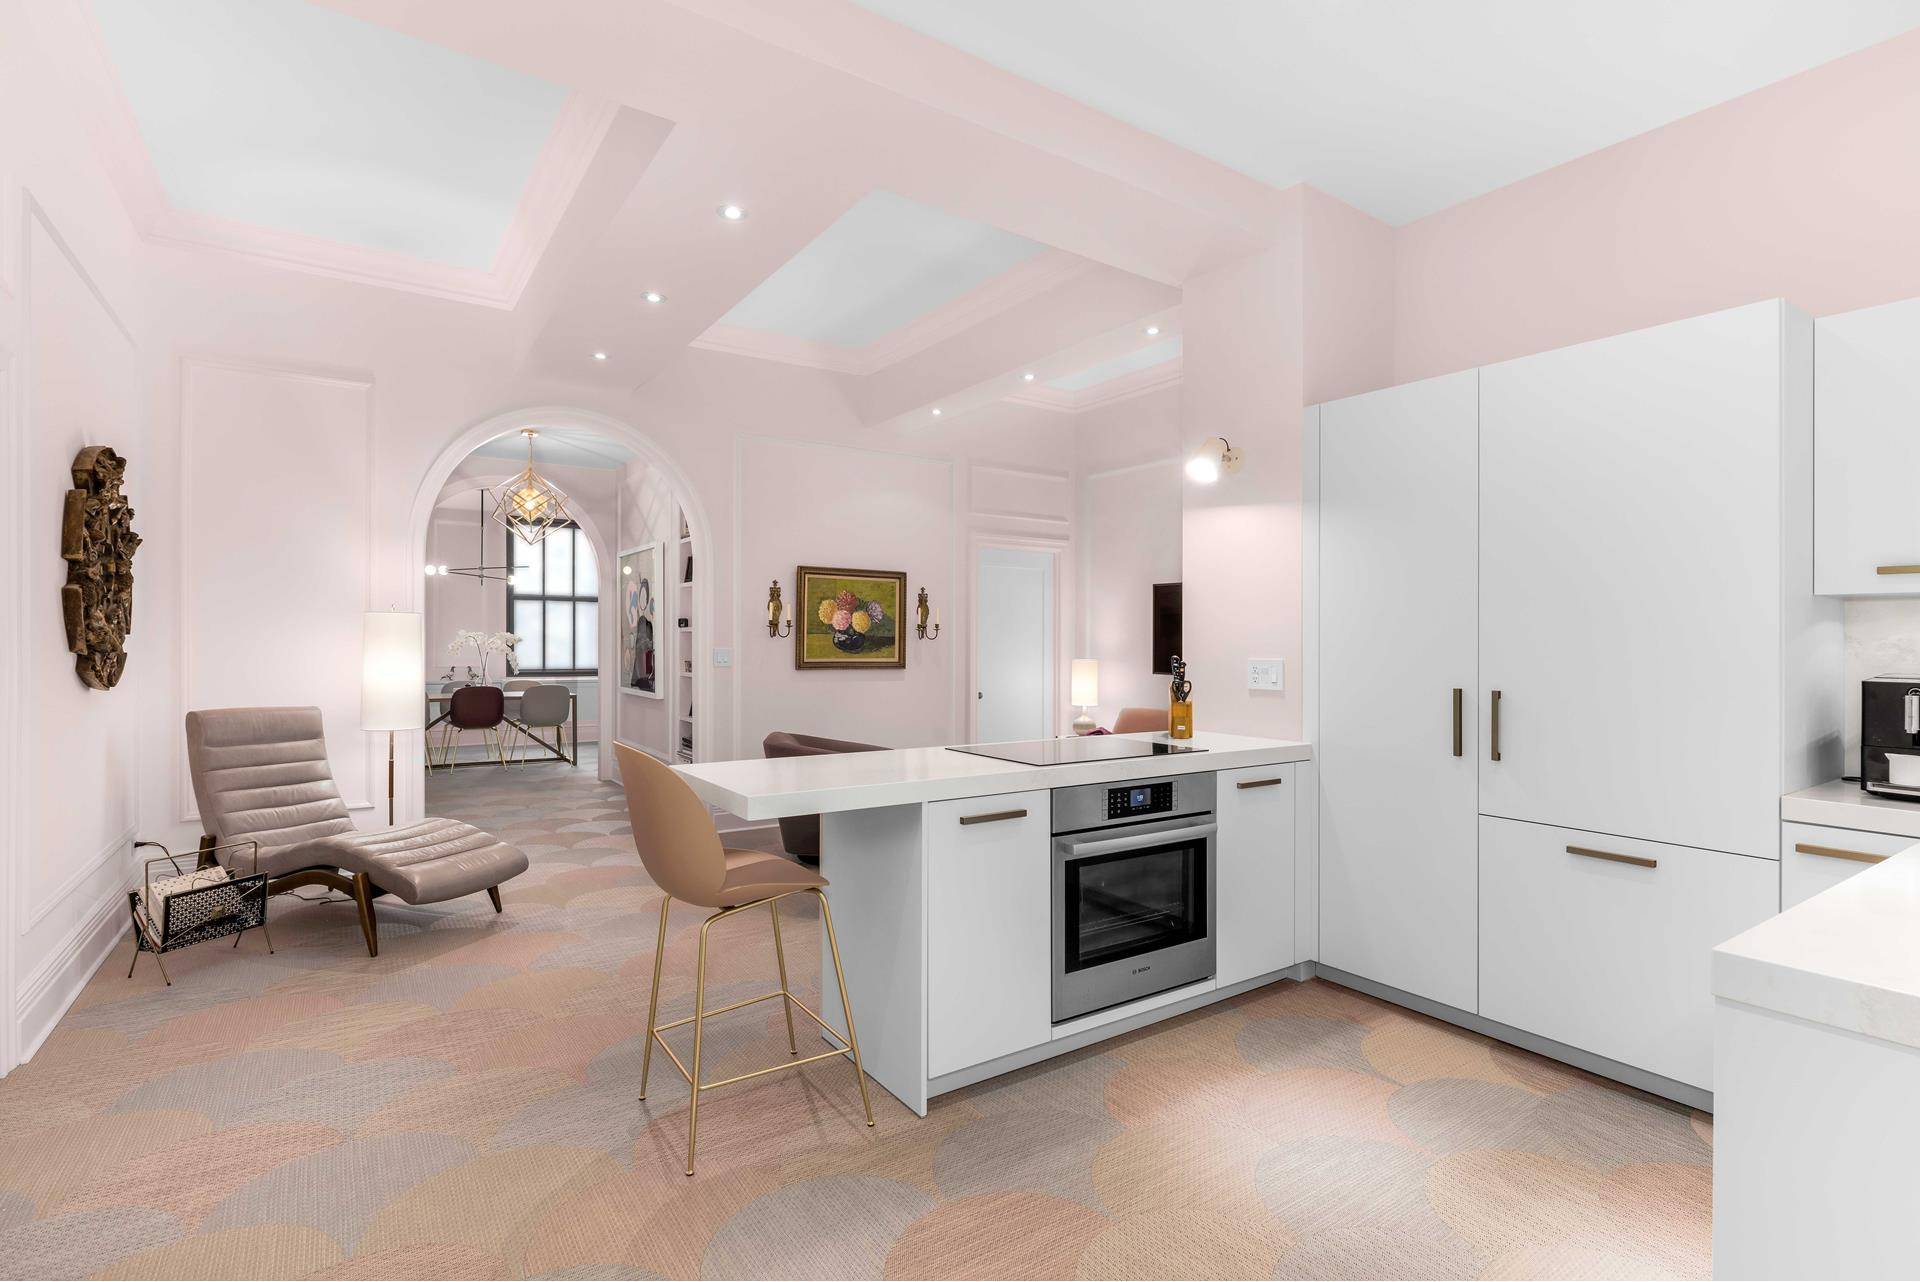 On the market for the first time since its renovation is this exquisite and spacious two bedroom, two bathroom loft situated in the very heart of historic Tribeca.